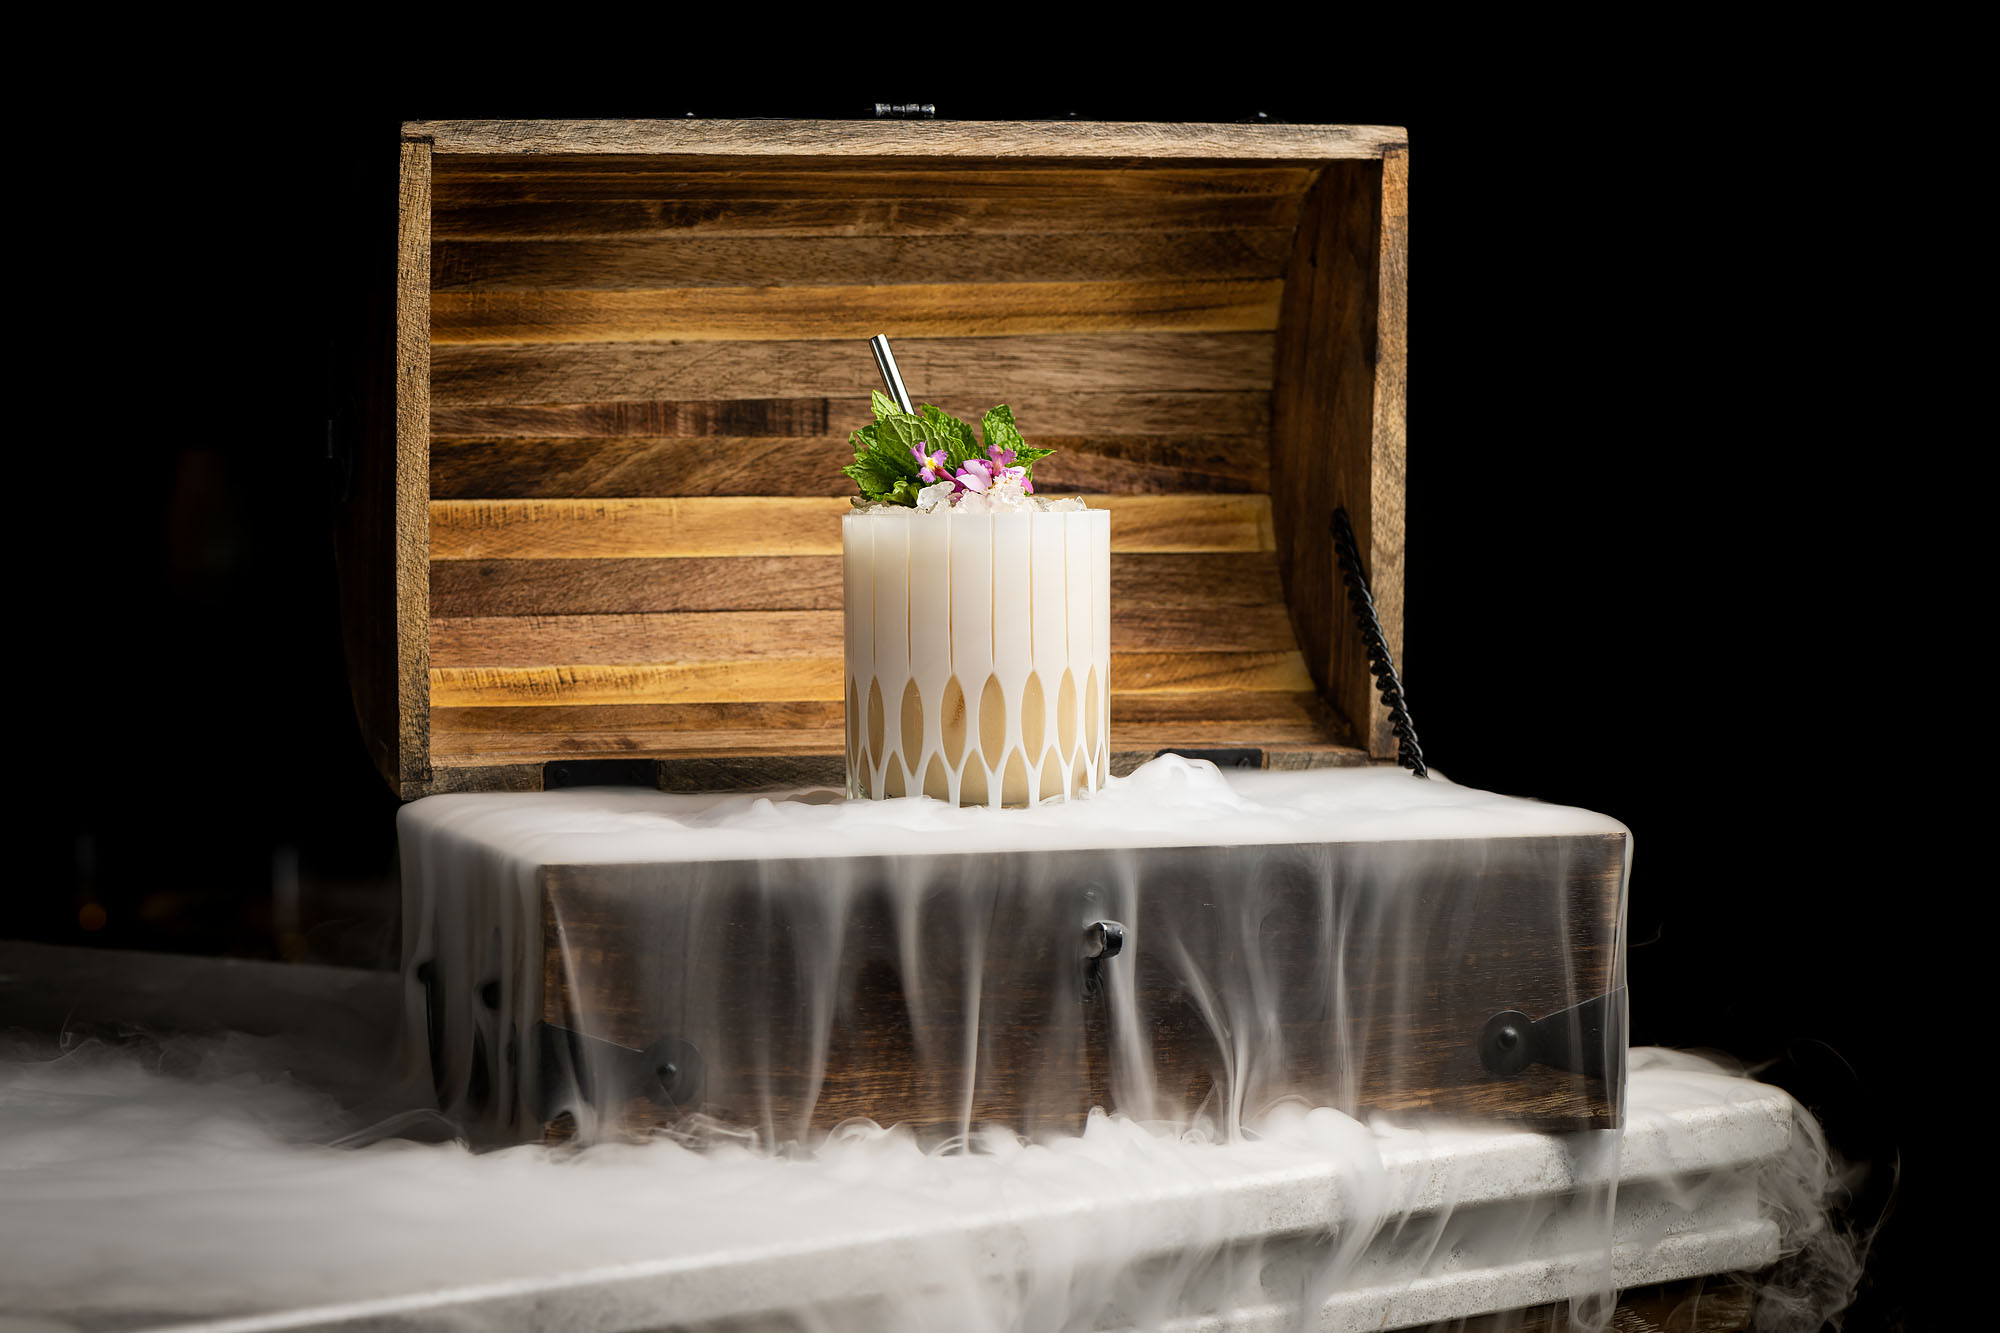 A cocktail in a white and tan colorway within a smoking box.